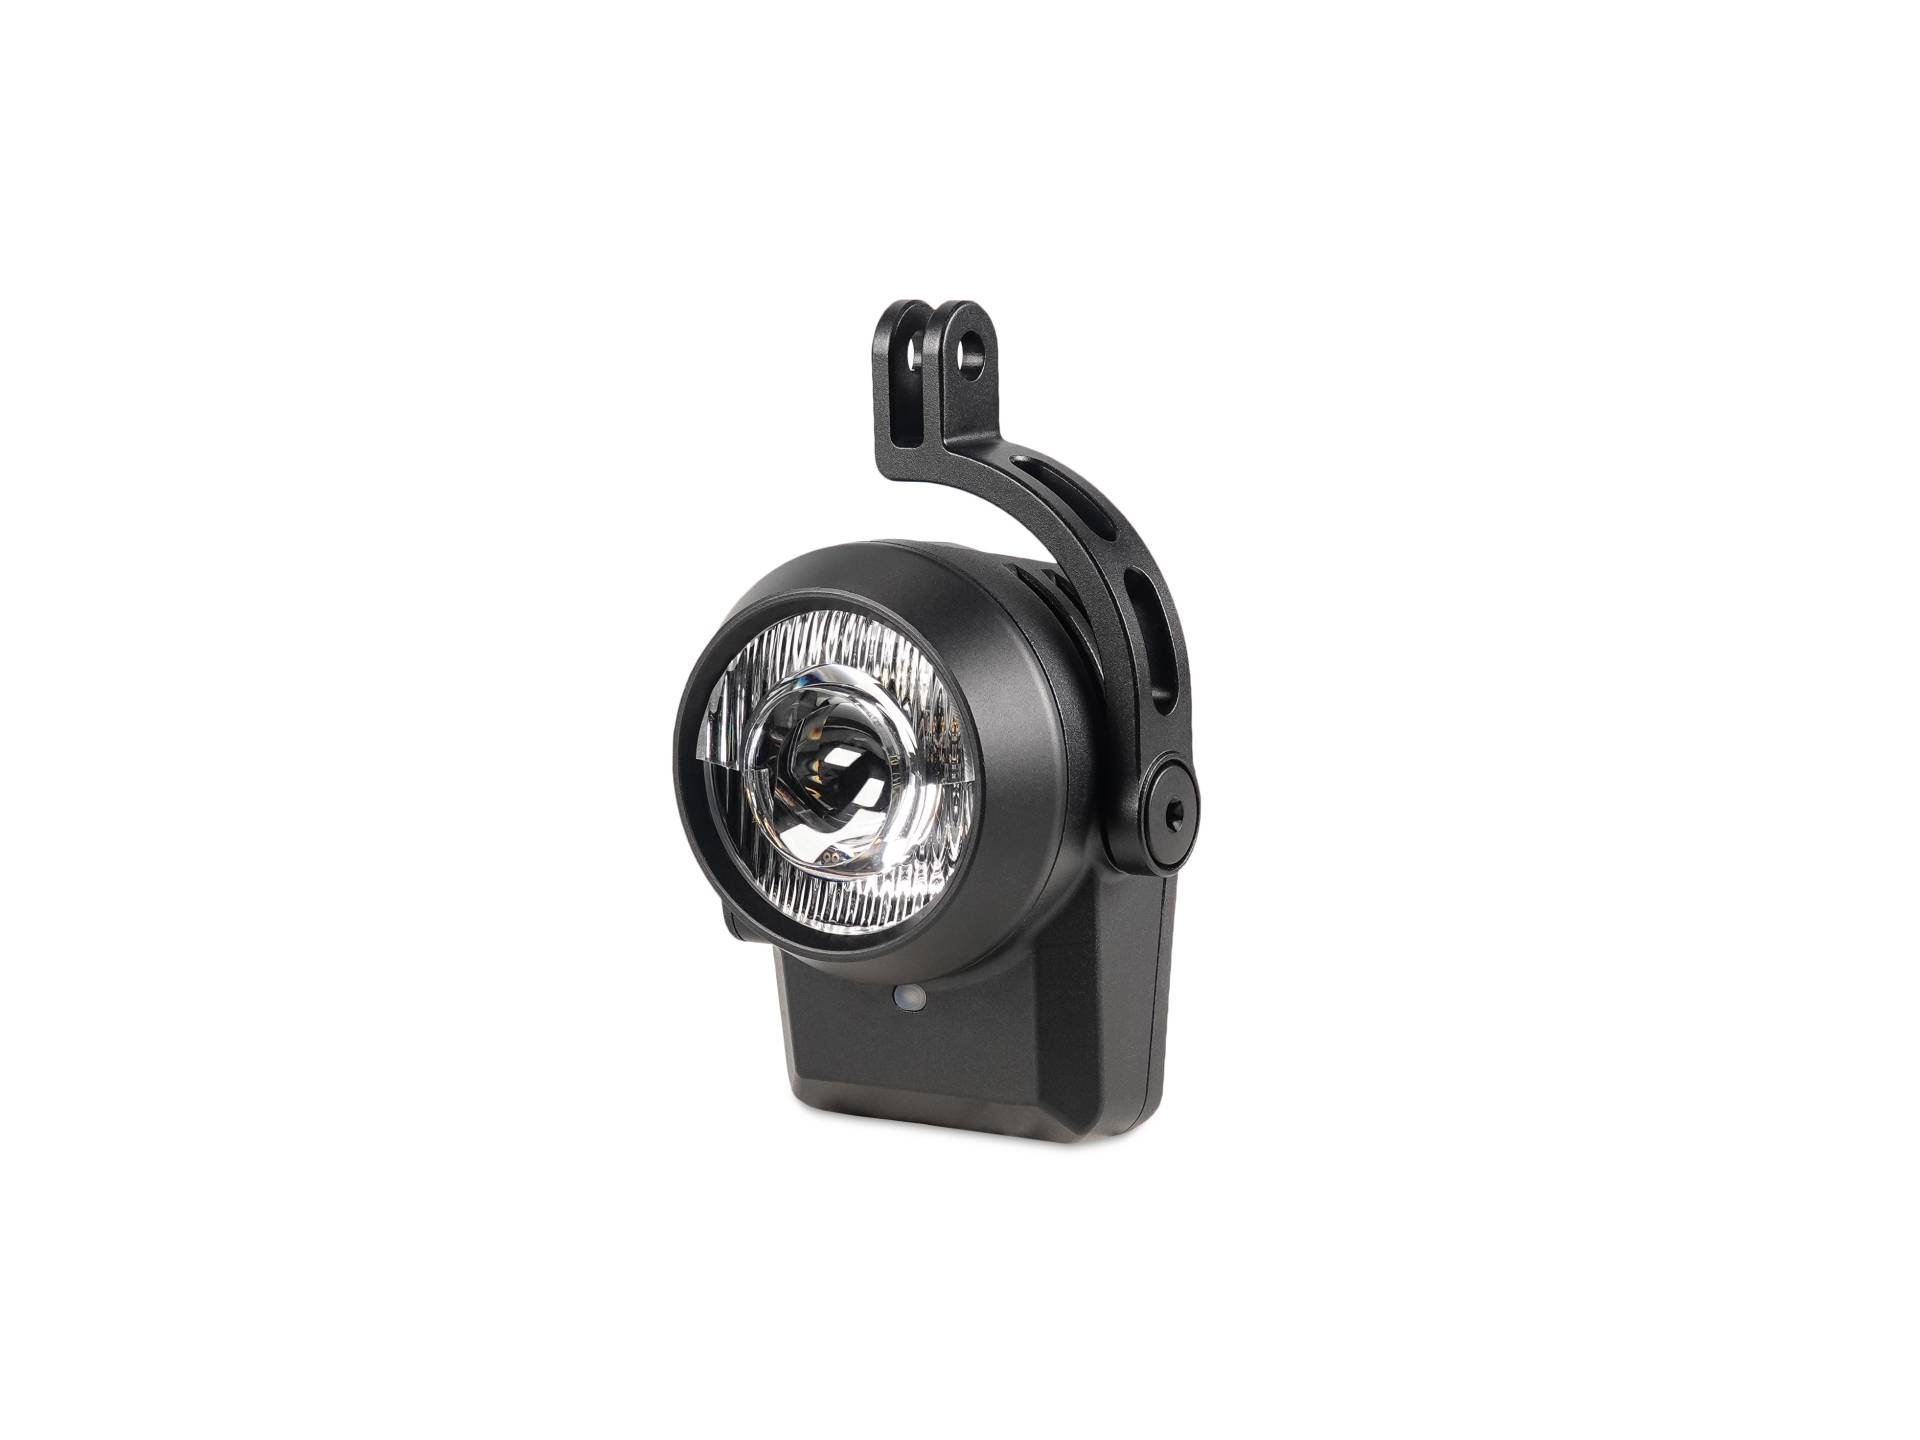 https://www.cycling-parts.ch/images/product_images/original_images/lupine-sl-mono-gopro-adapter-1.jpg